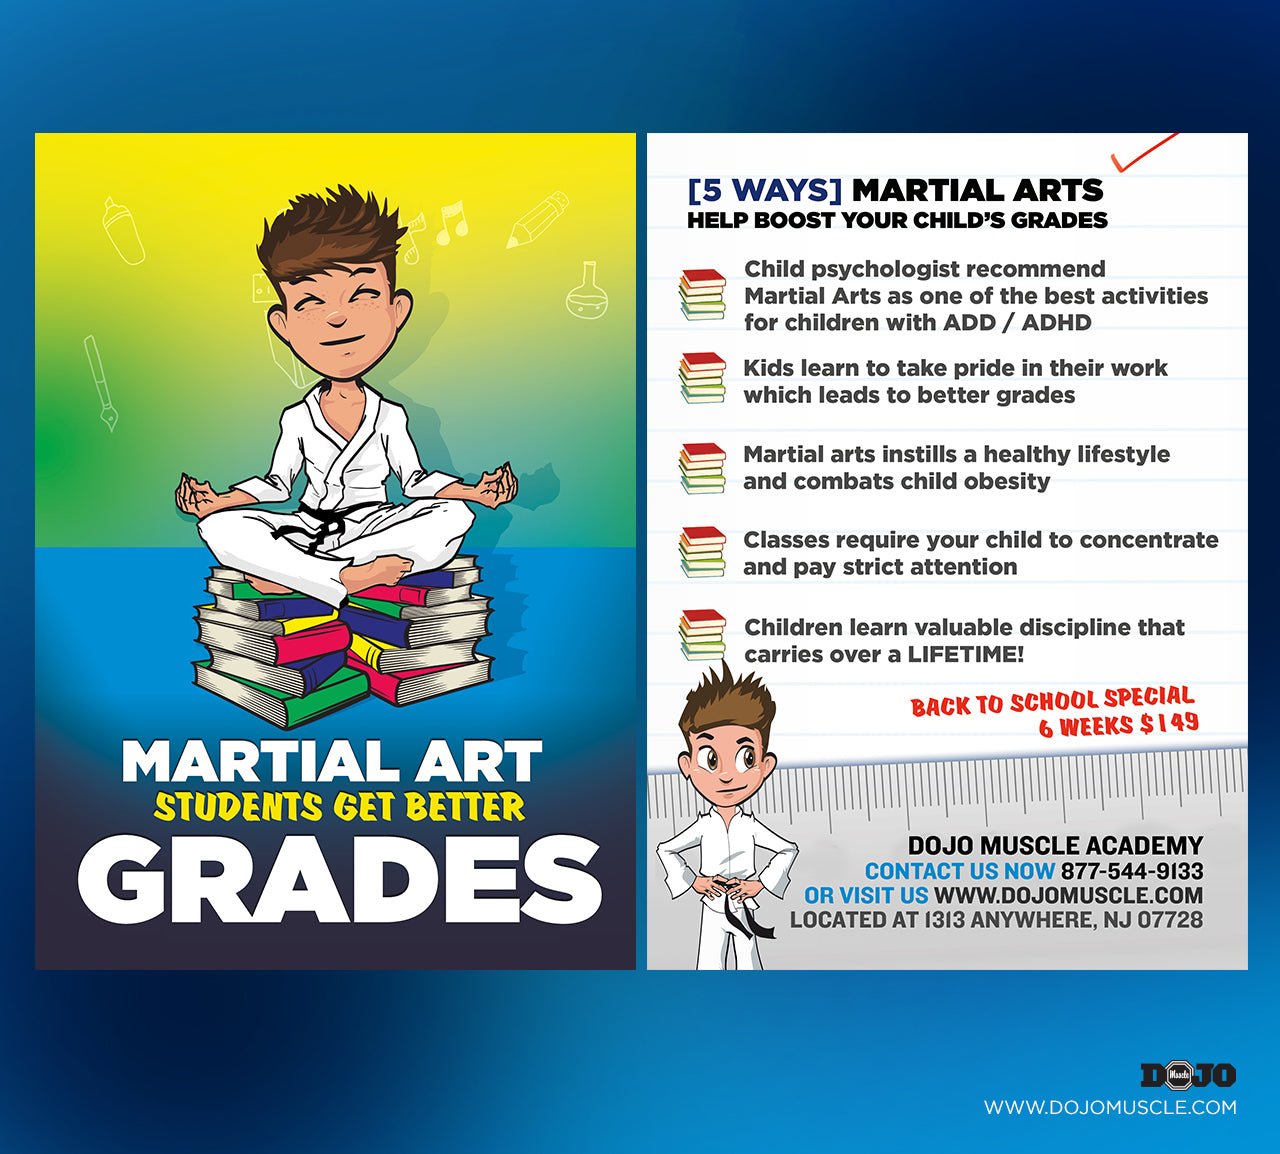 How to get enrollments for back to school with your martial art school. - Dojo Muscle